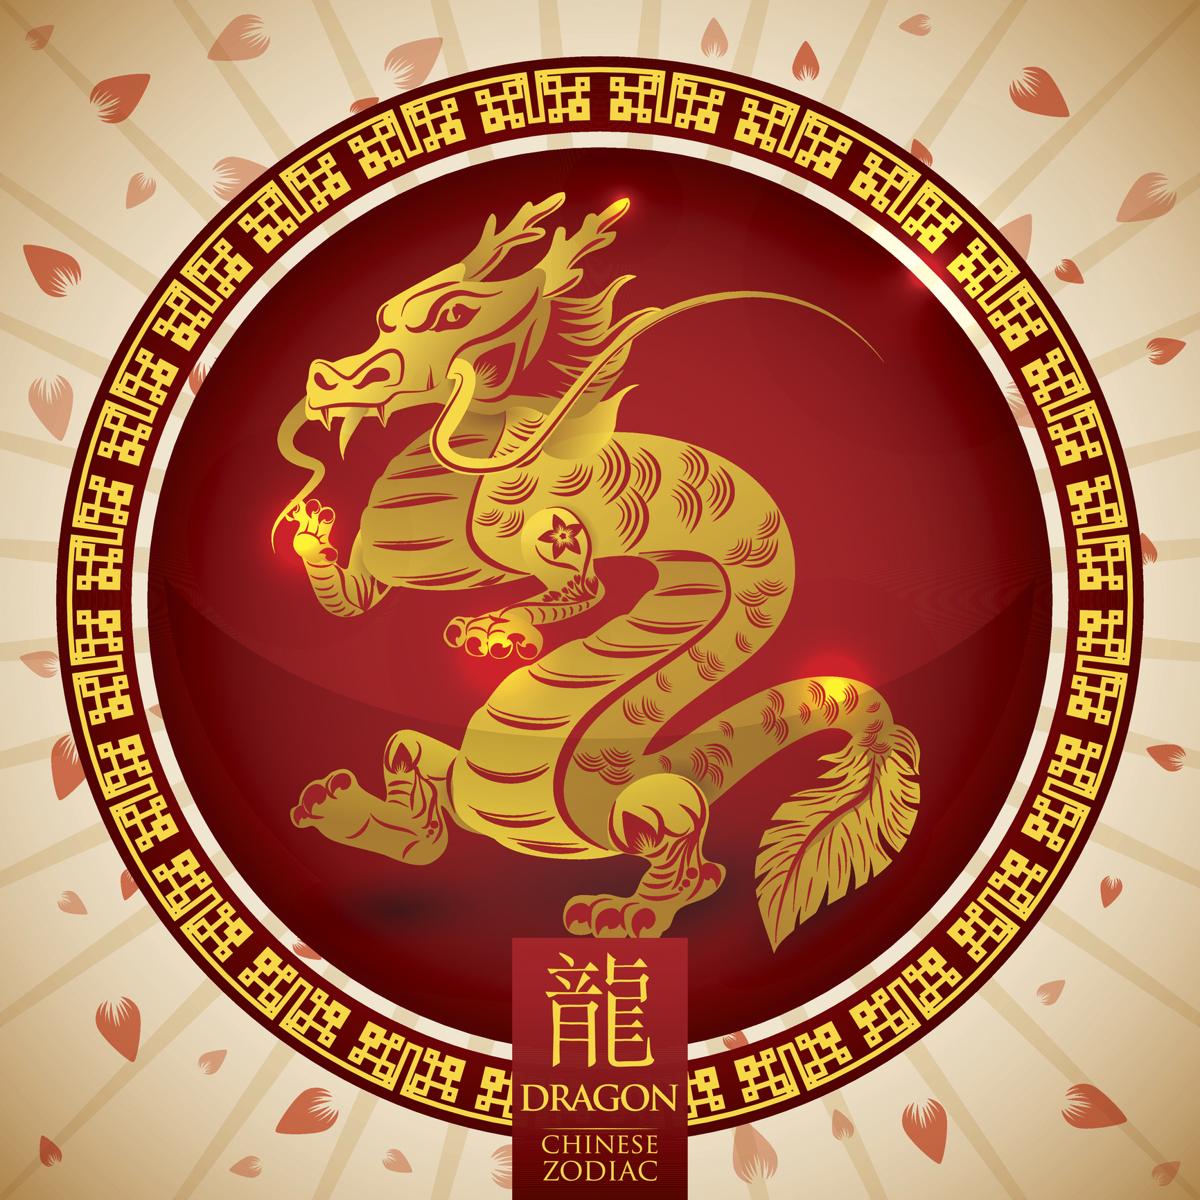 Detailed Information About the Chinese Zodiac Symbols and Meanings